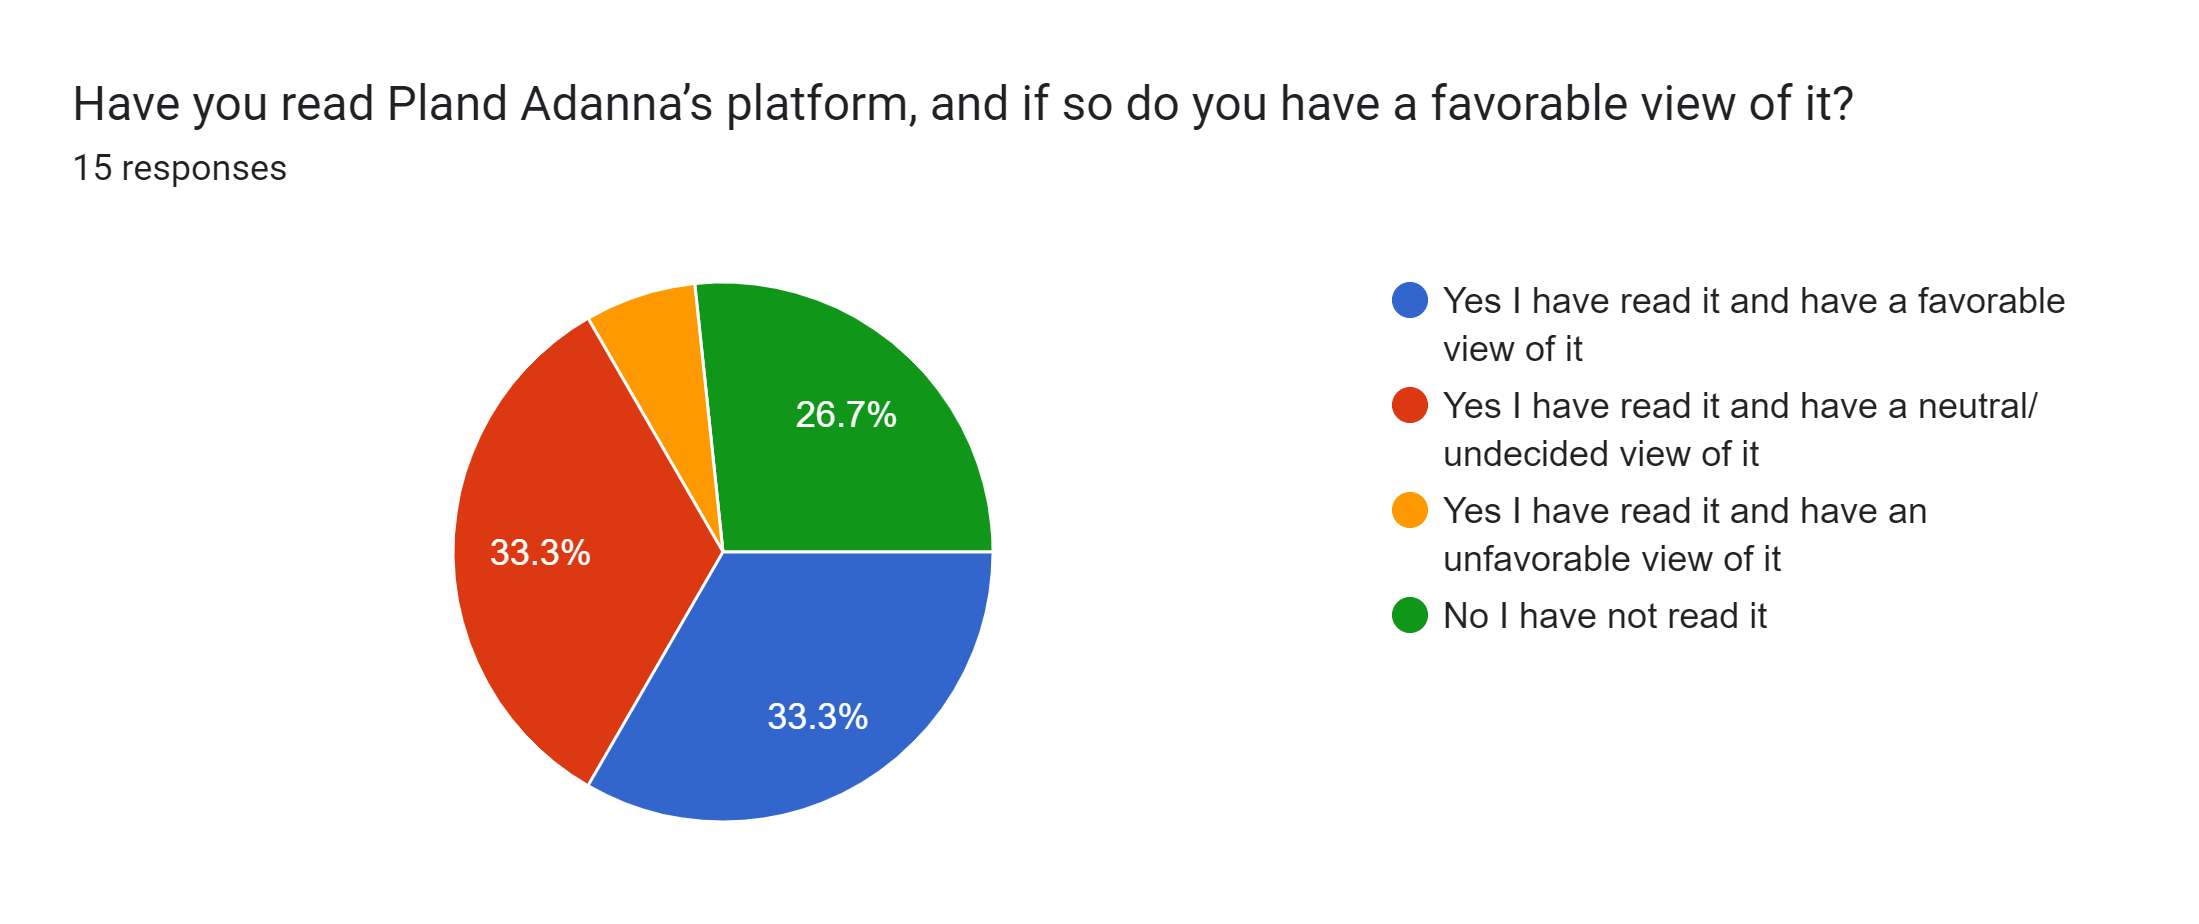 Forms response chart. Question title: Have you read Pland Adanna’s platform, and if so do you have a favorable view of it?. Number of responses: 15 responses.